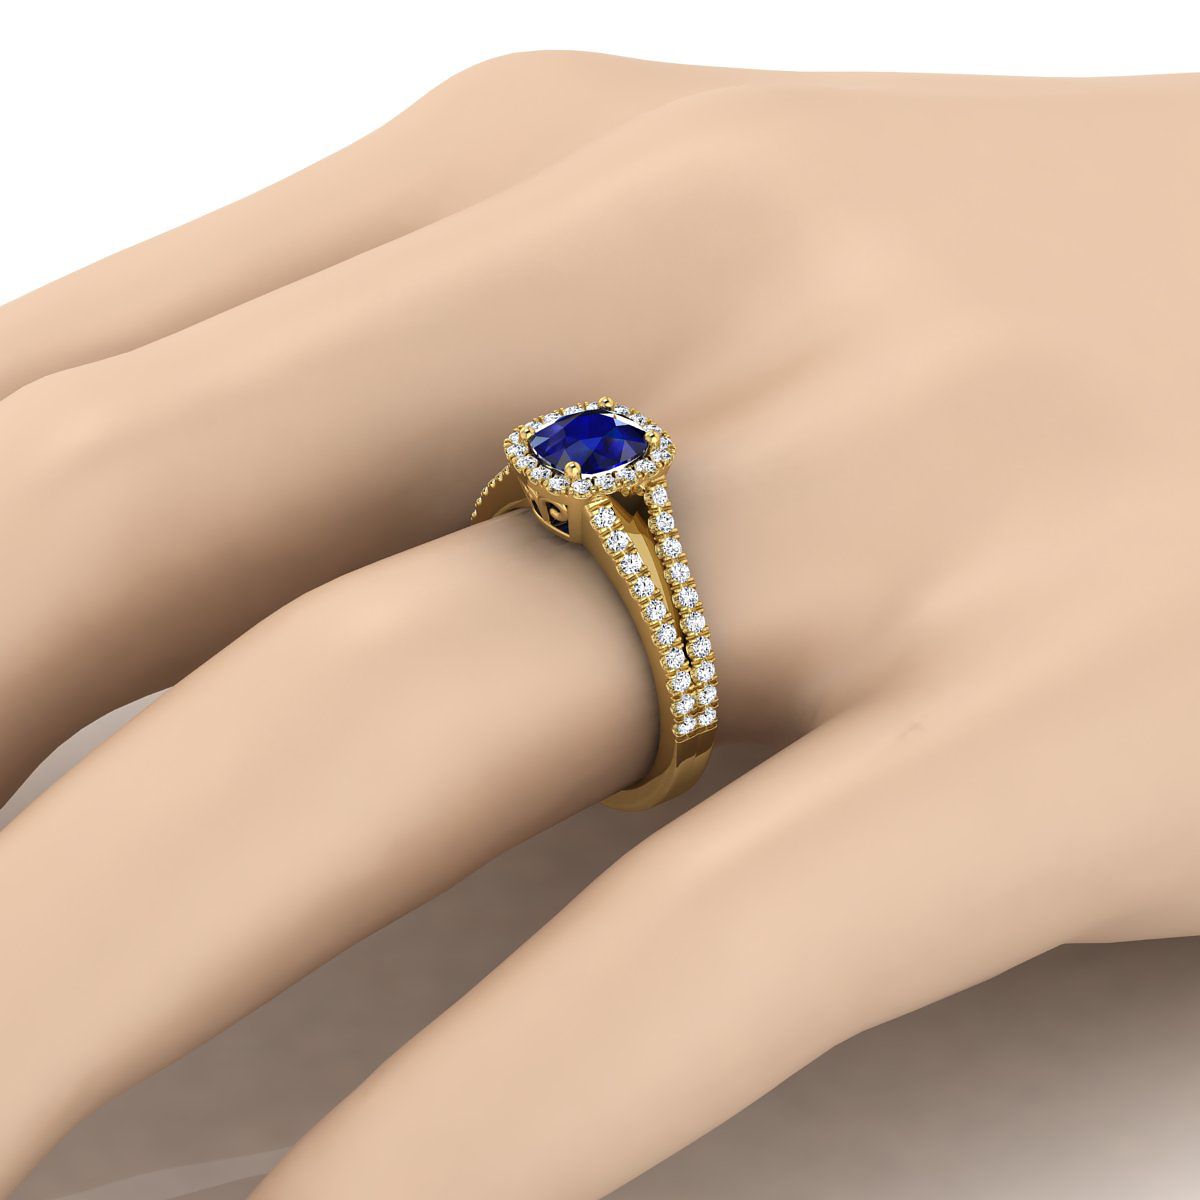 18K Yellow Gold Cushion Sapphire Halo Center with French Pave Split Shank Engagement Ring -3/8ctw